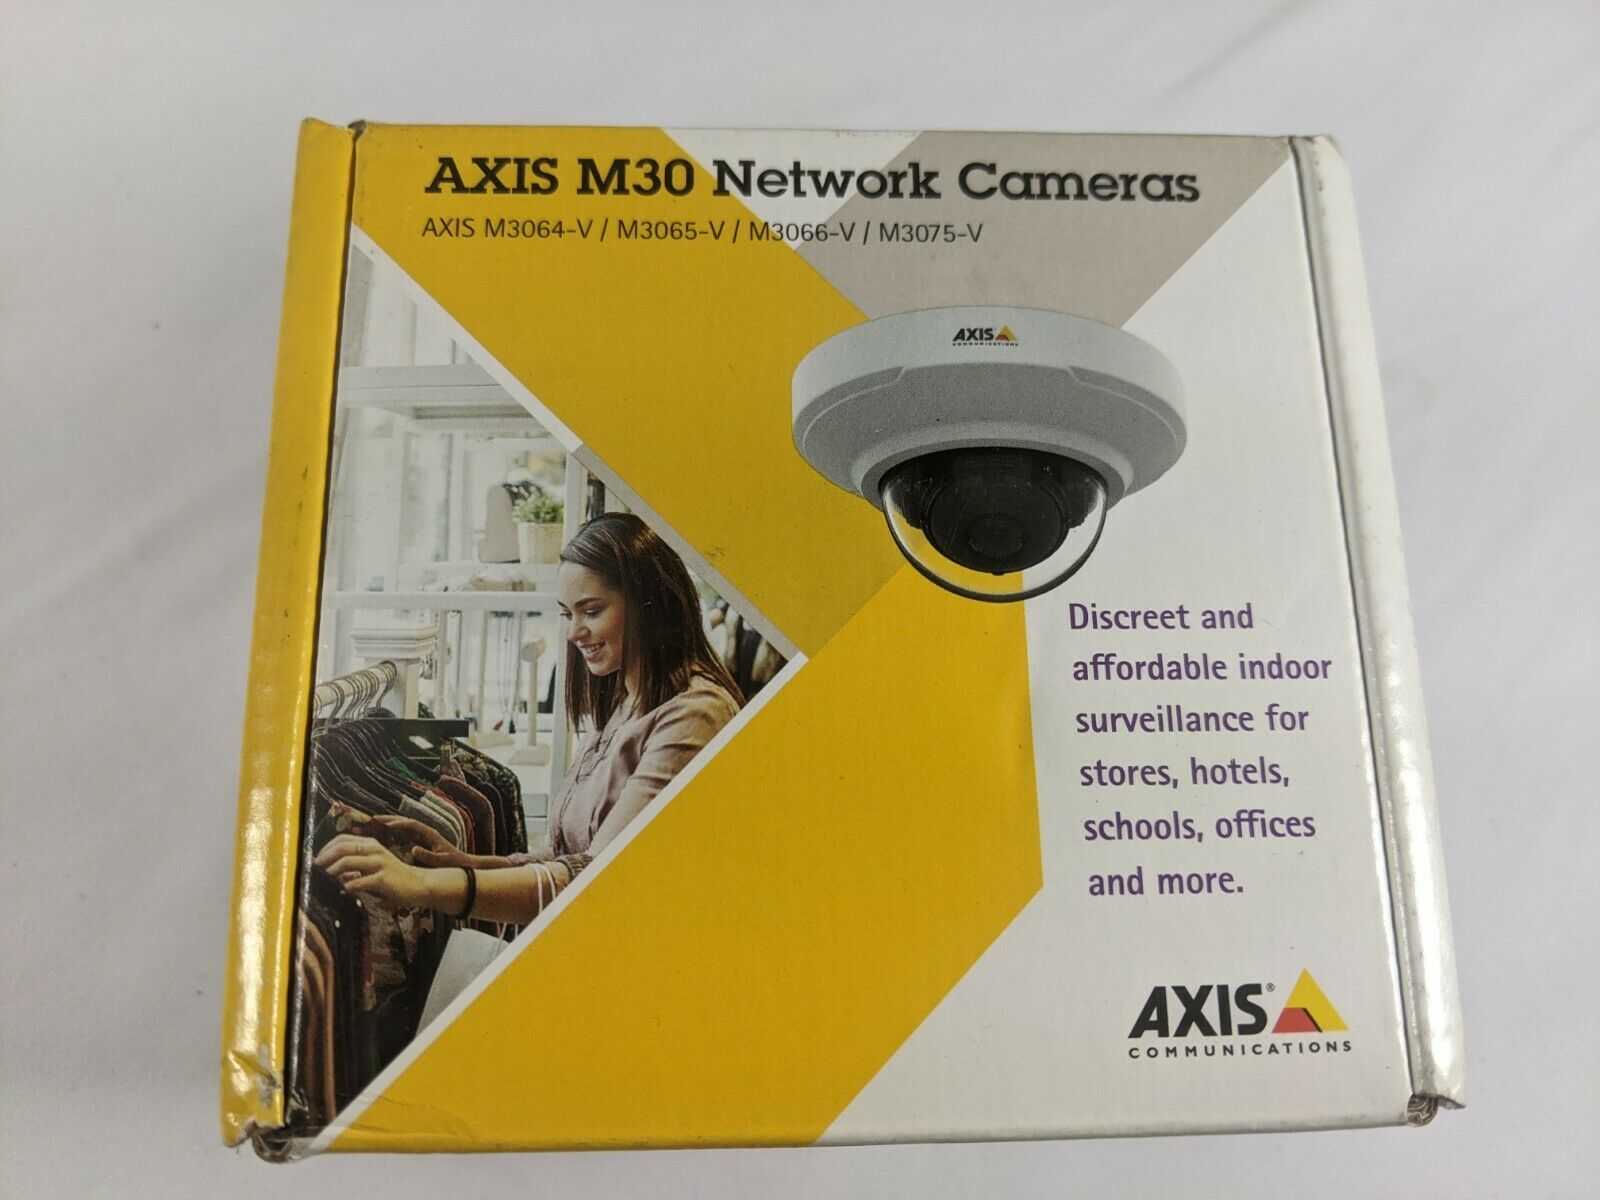 AXIS M3064-V Fixed Dome Network Camera 01716-001.